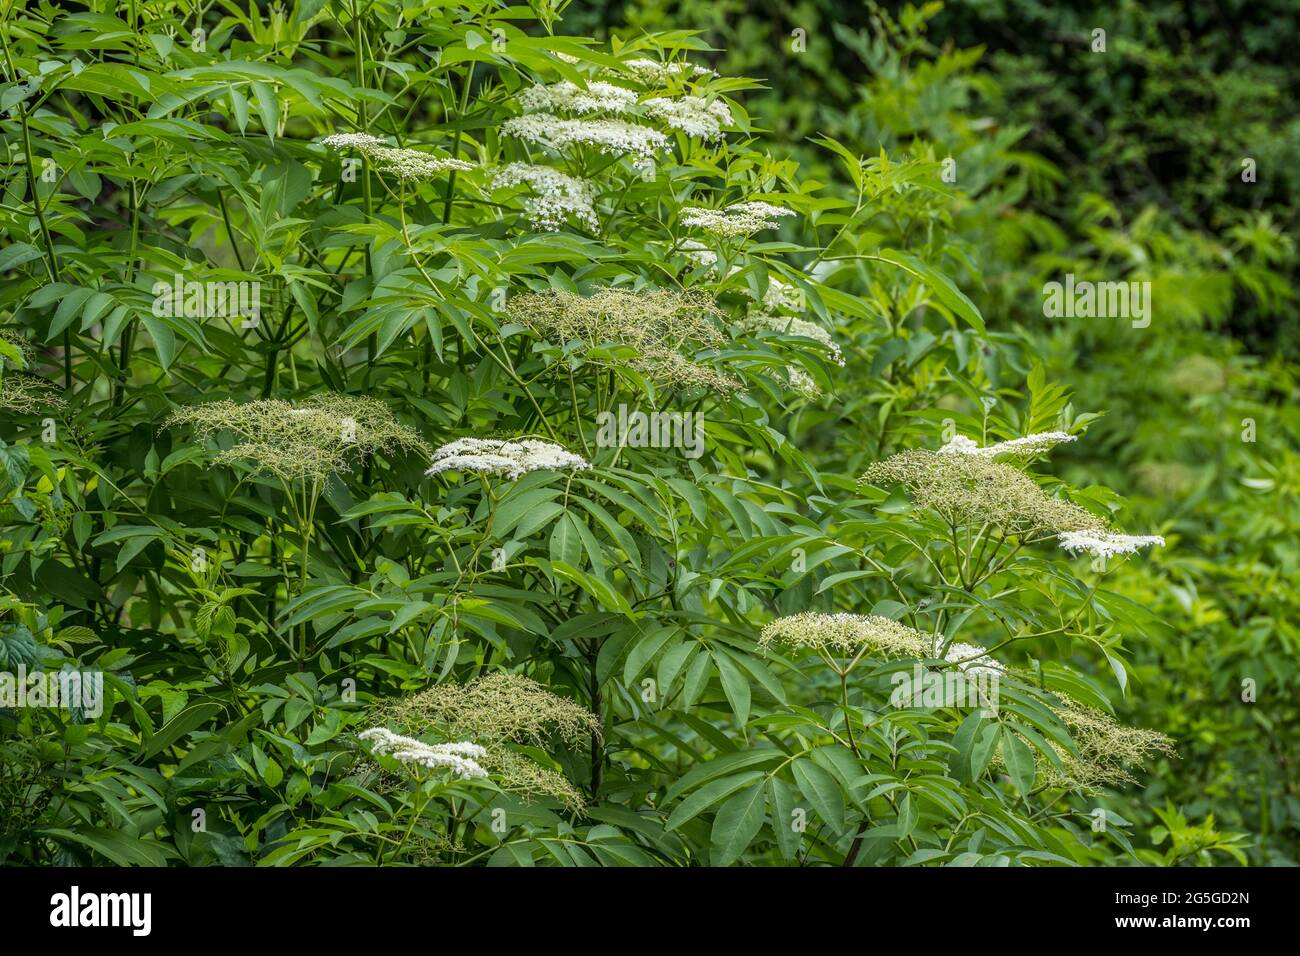 Common elderberry bush with many uses starting to bloom with little white flowers clustered together closeup growing wild in the woodlands on a sunny Stock Photo